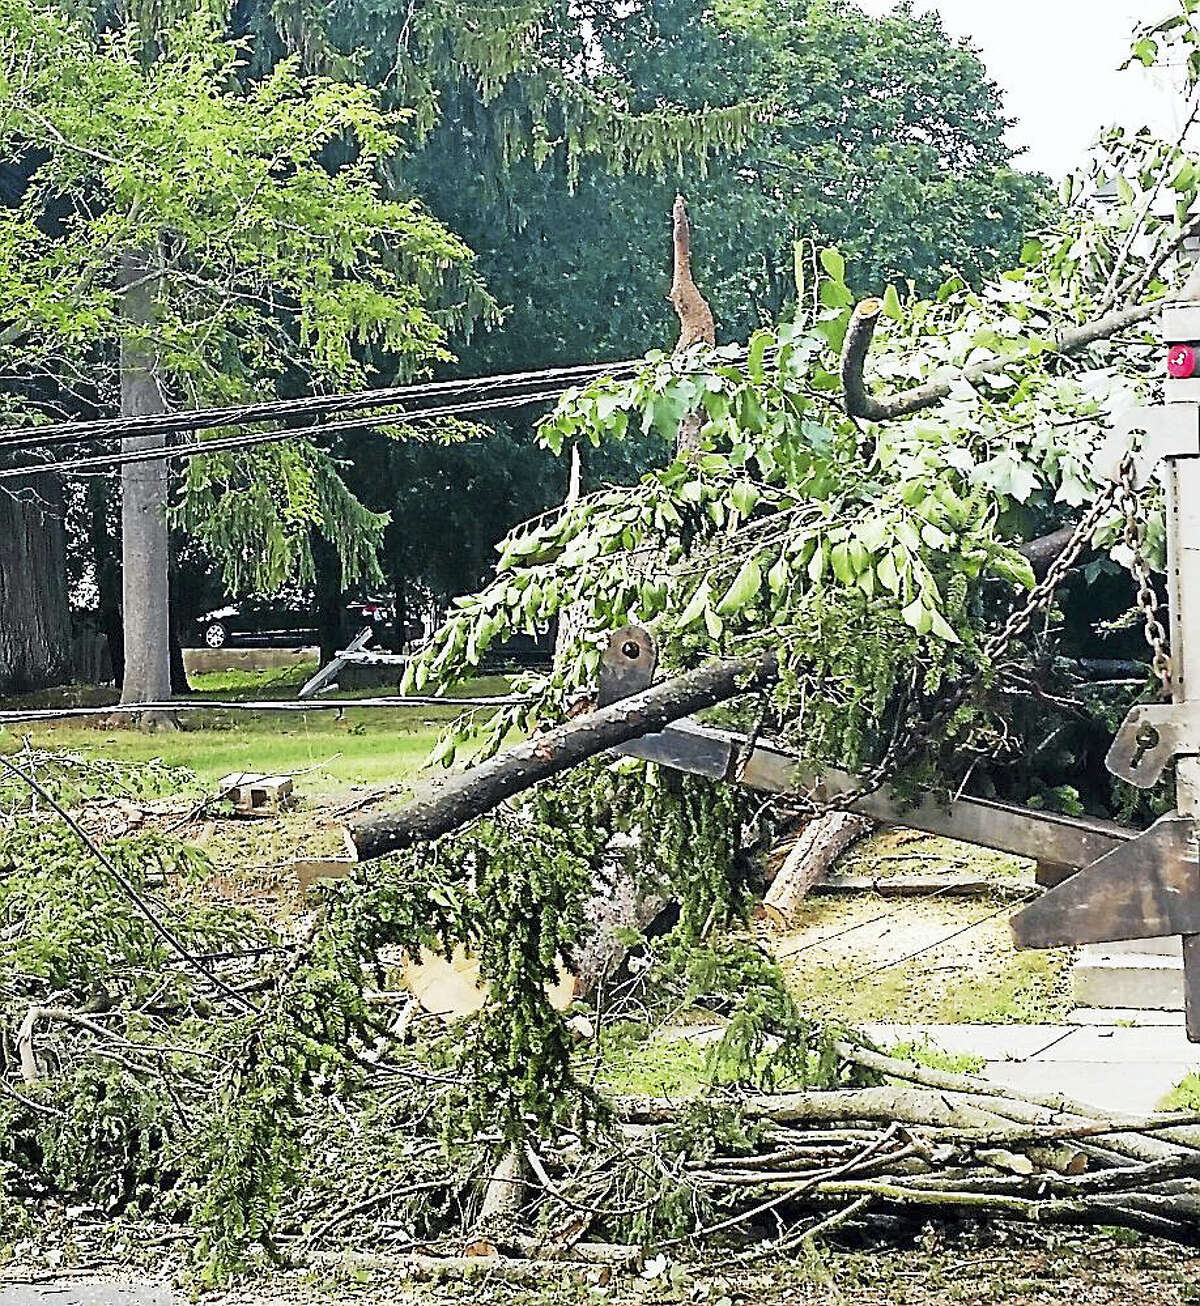 A Middletown public works dump truck carefully removes a tangle of tree branches but has to stop quickly when the driver was alerted to the debris being caught up in electricity wires, which although the power had been shut off, were still connected to the utility pole on one end.